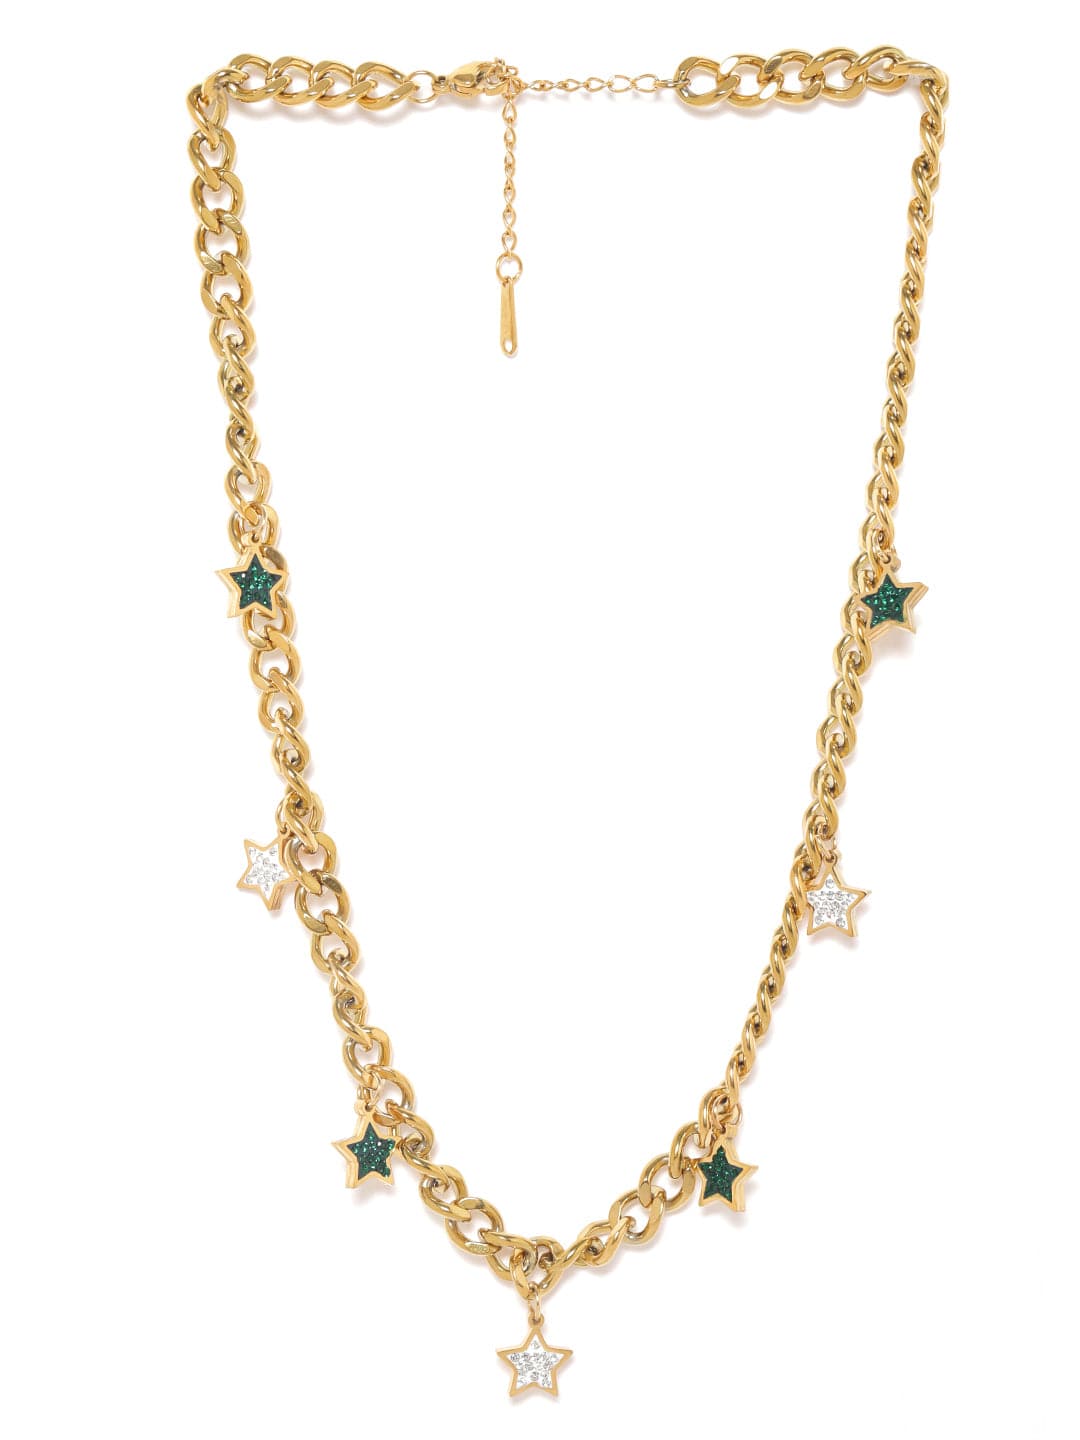 Rubans Voguish Starry Frontier Western Star Necklace Necklaces, Necklace Sets, Chains & Mangalsutra